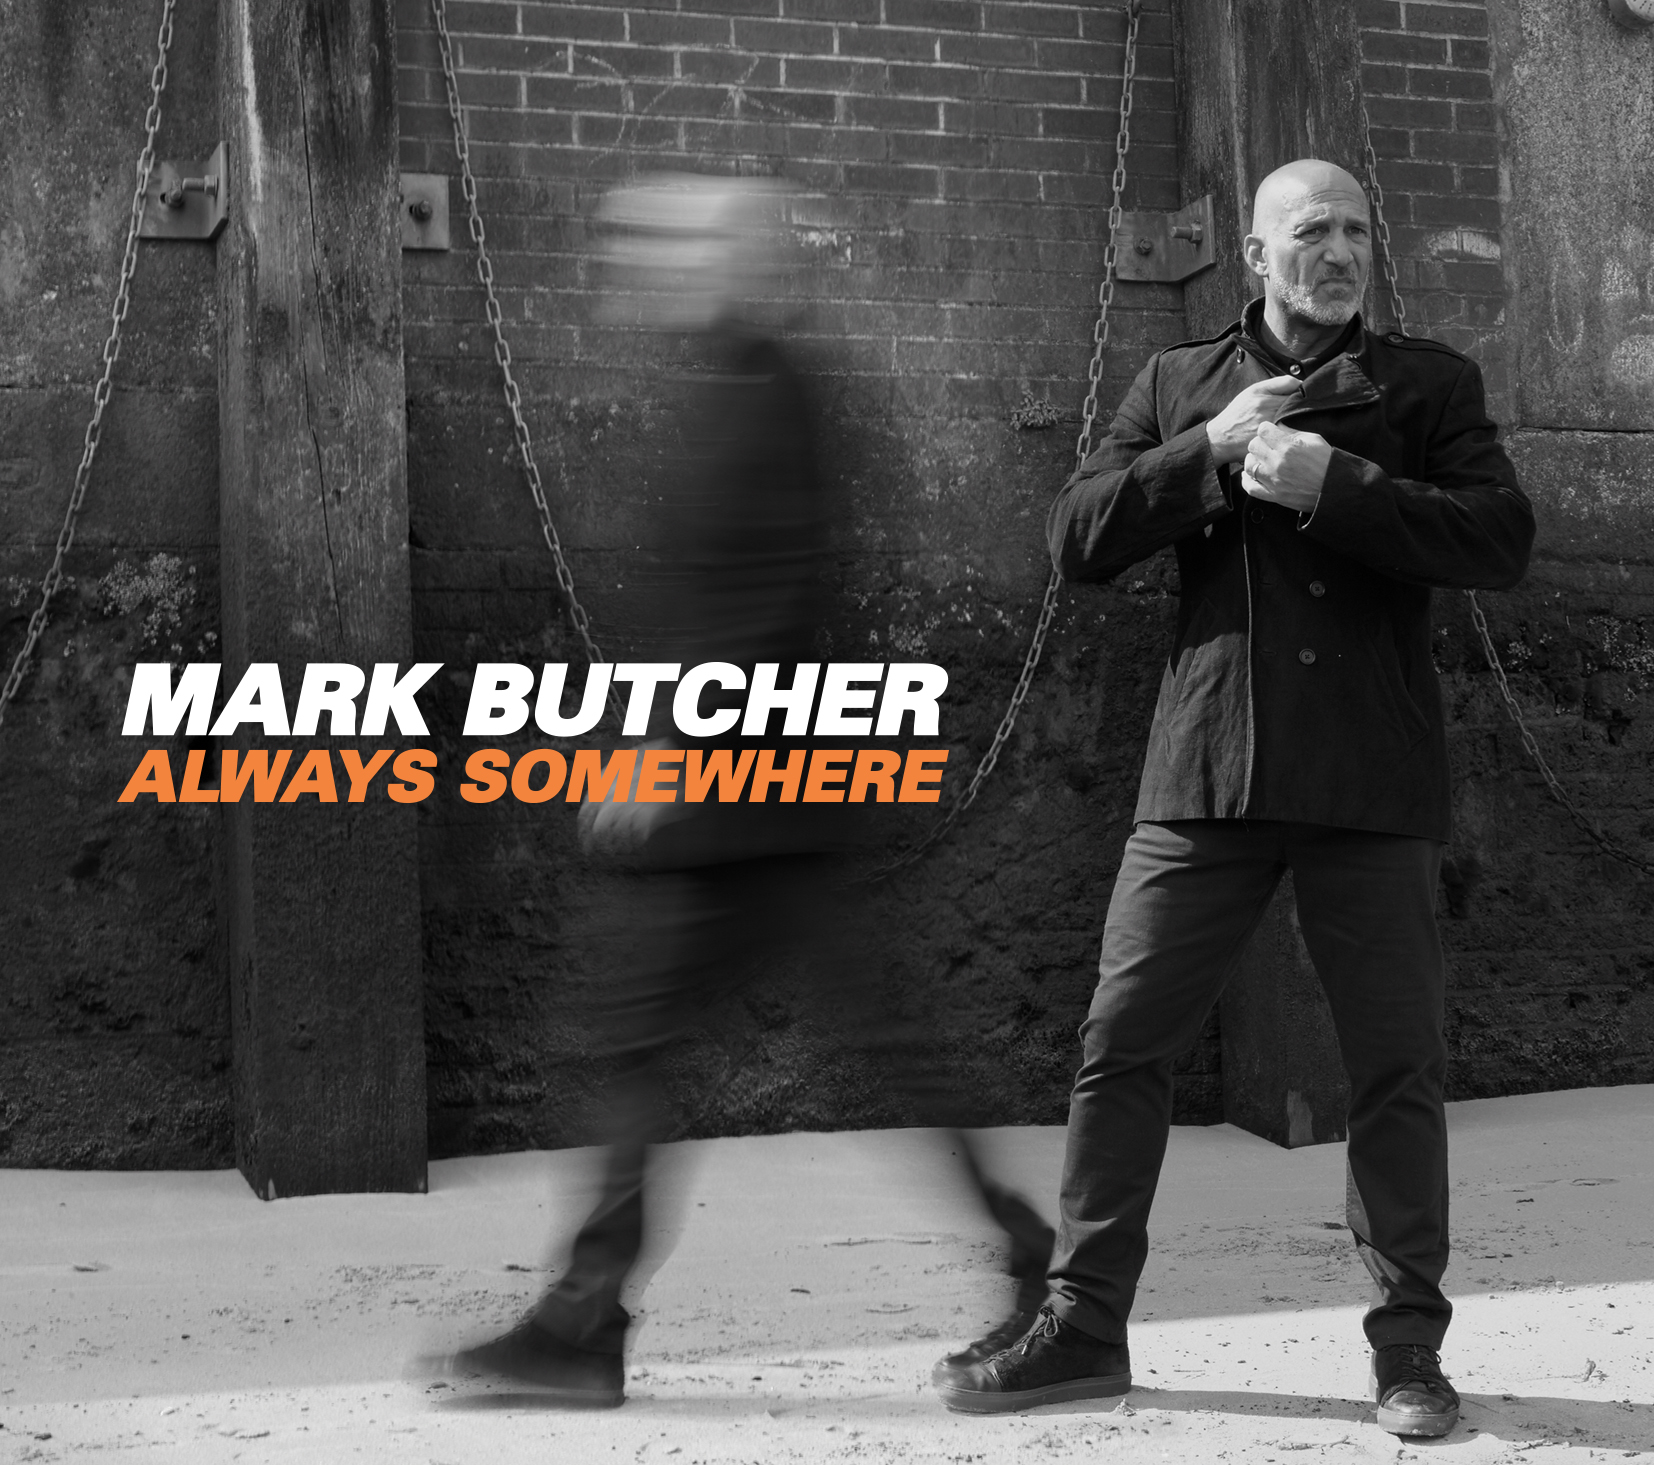 Mark Butcher - Always Somewhere album available to pre-order